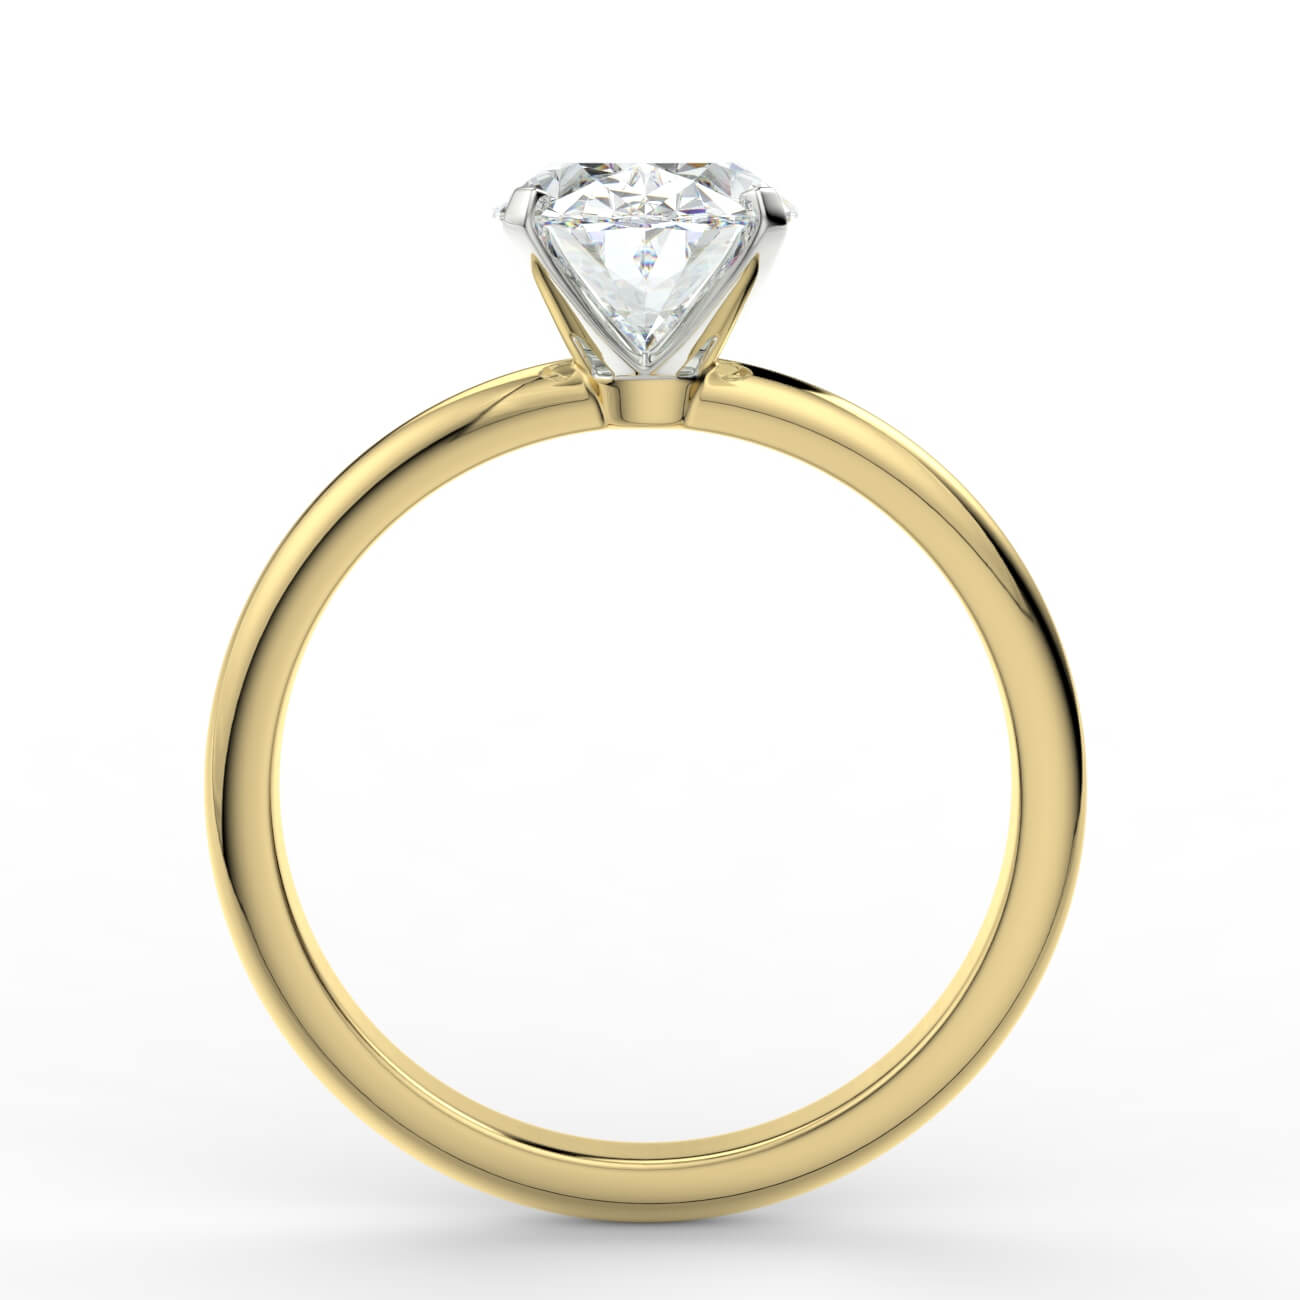 Tapering Solitaire Engagement Ring in yellow and white gold – Australian Diamond Network